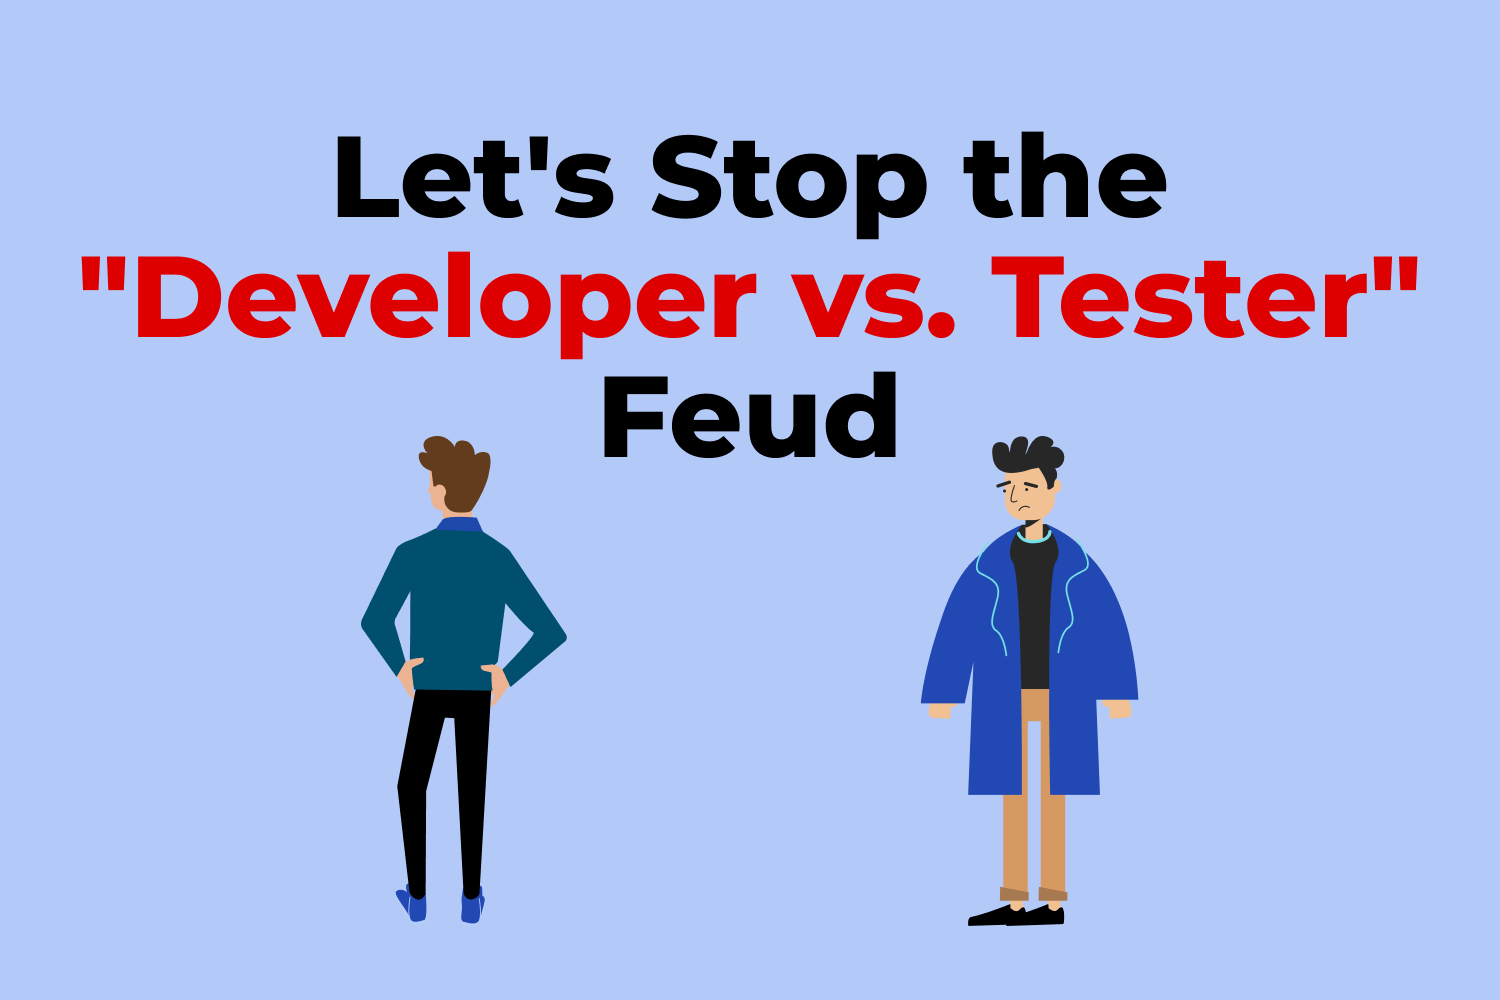 Is development superior to QA? Why or why not?
